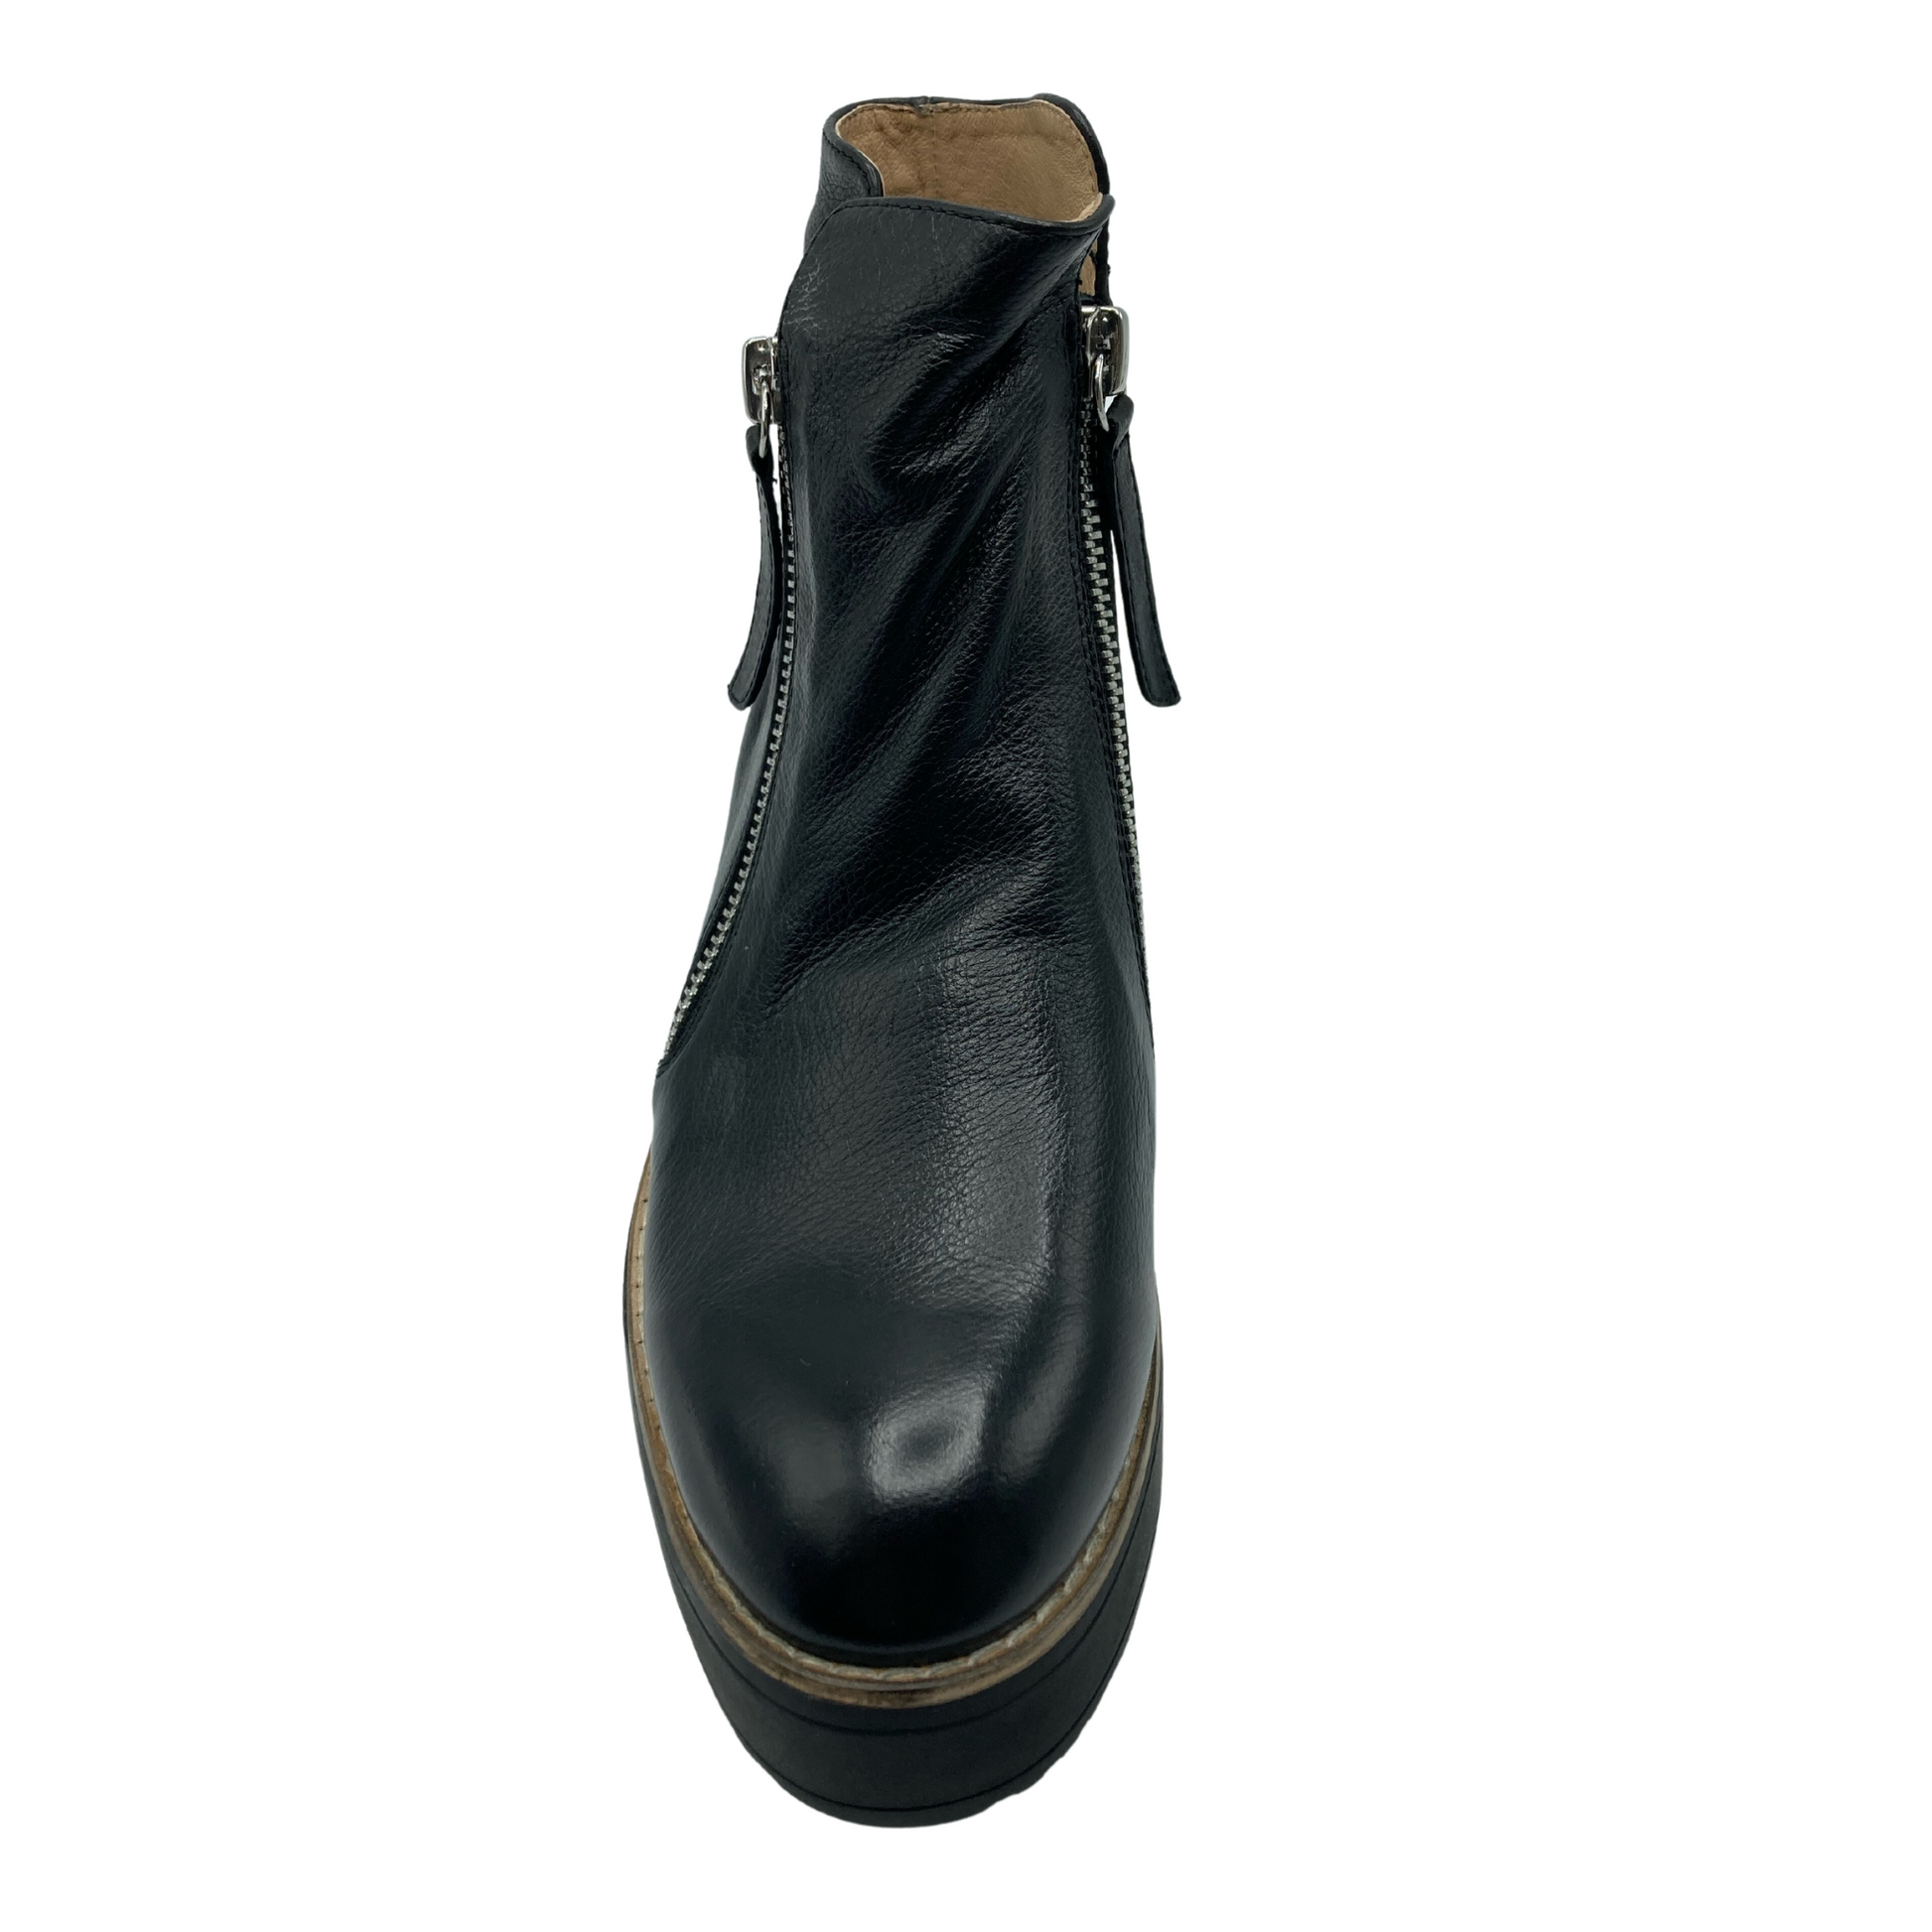 Top view of black leather short boot with rounded a zipper on the inside and outside of ankle